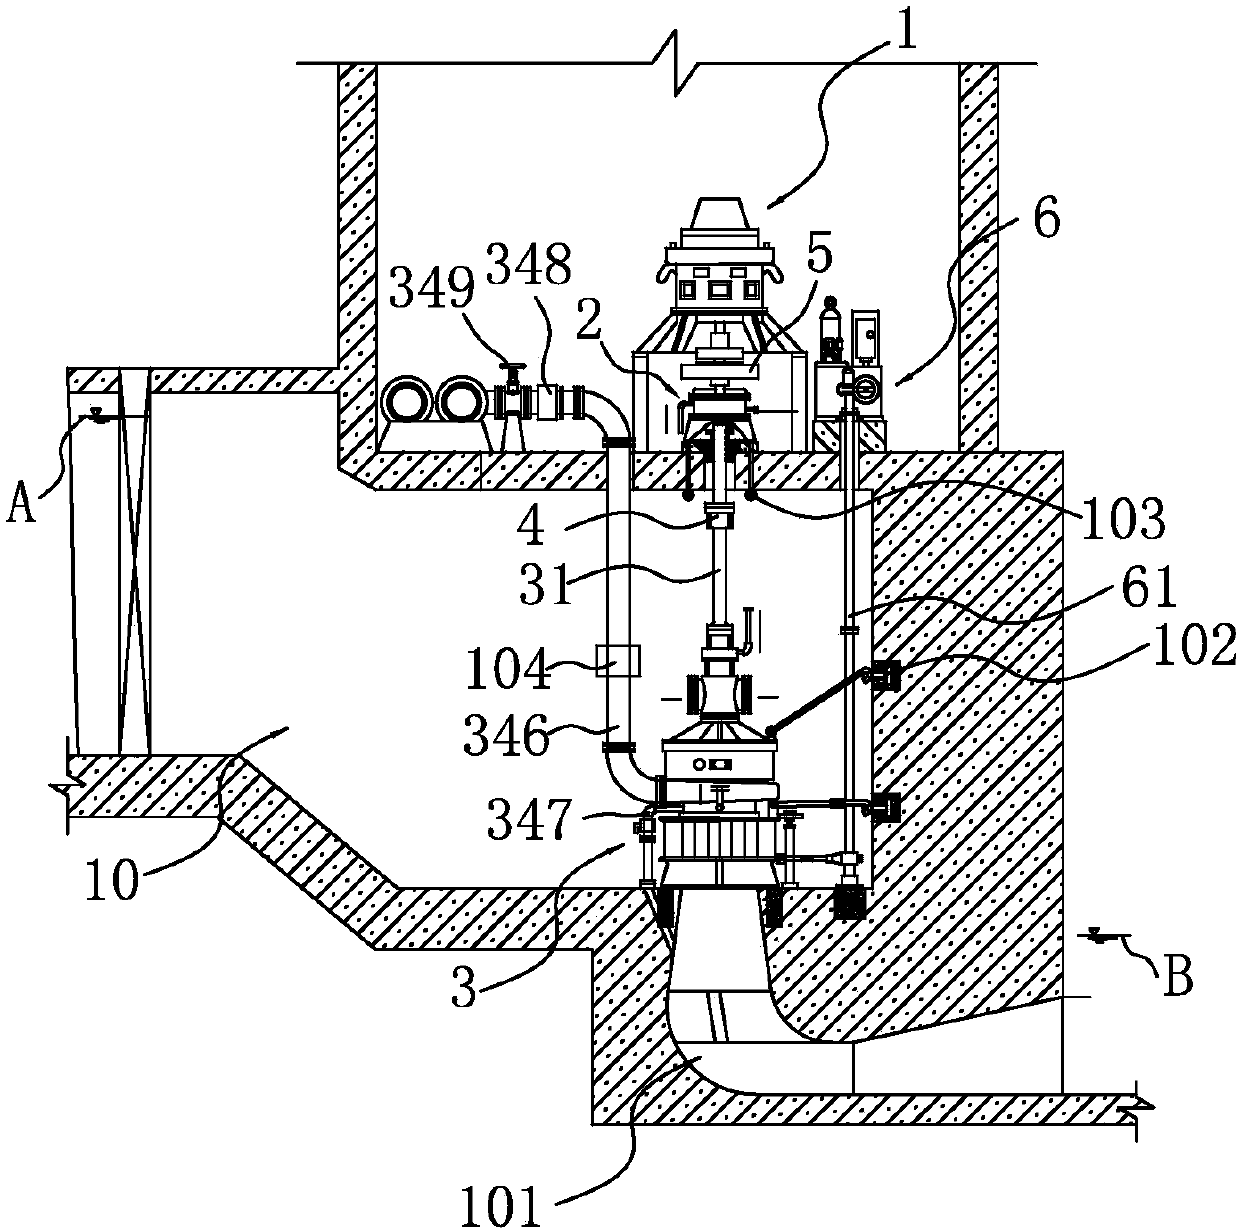 A dual-purpose three-stage water turbine pump for pumping hydropower generation and its installation method